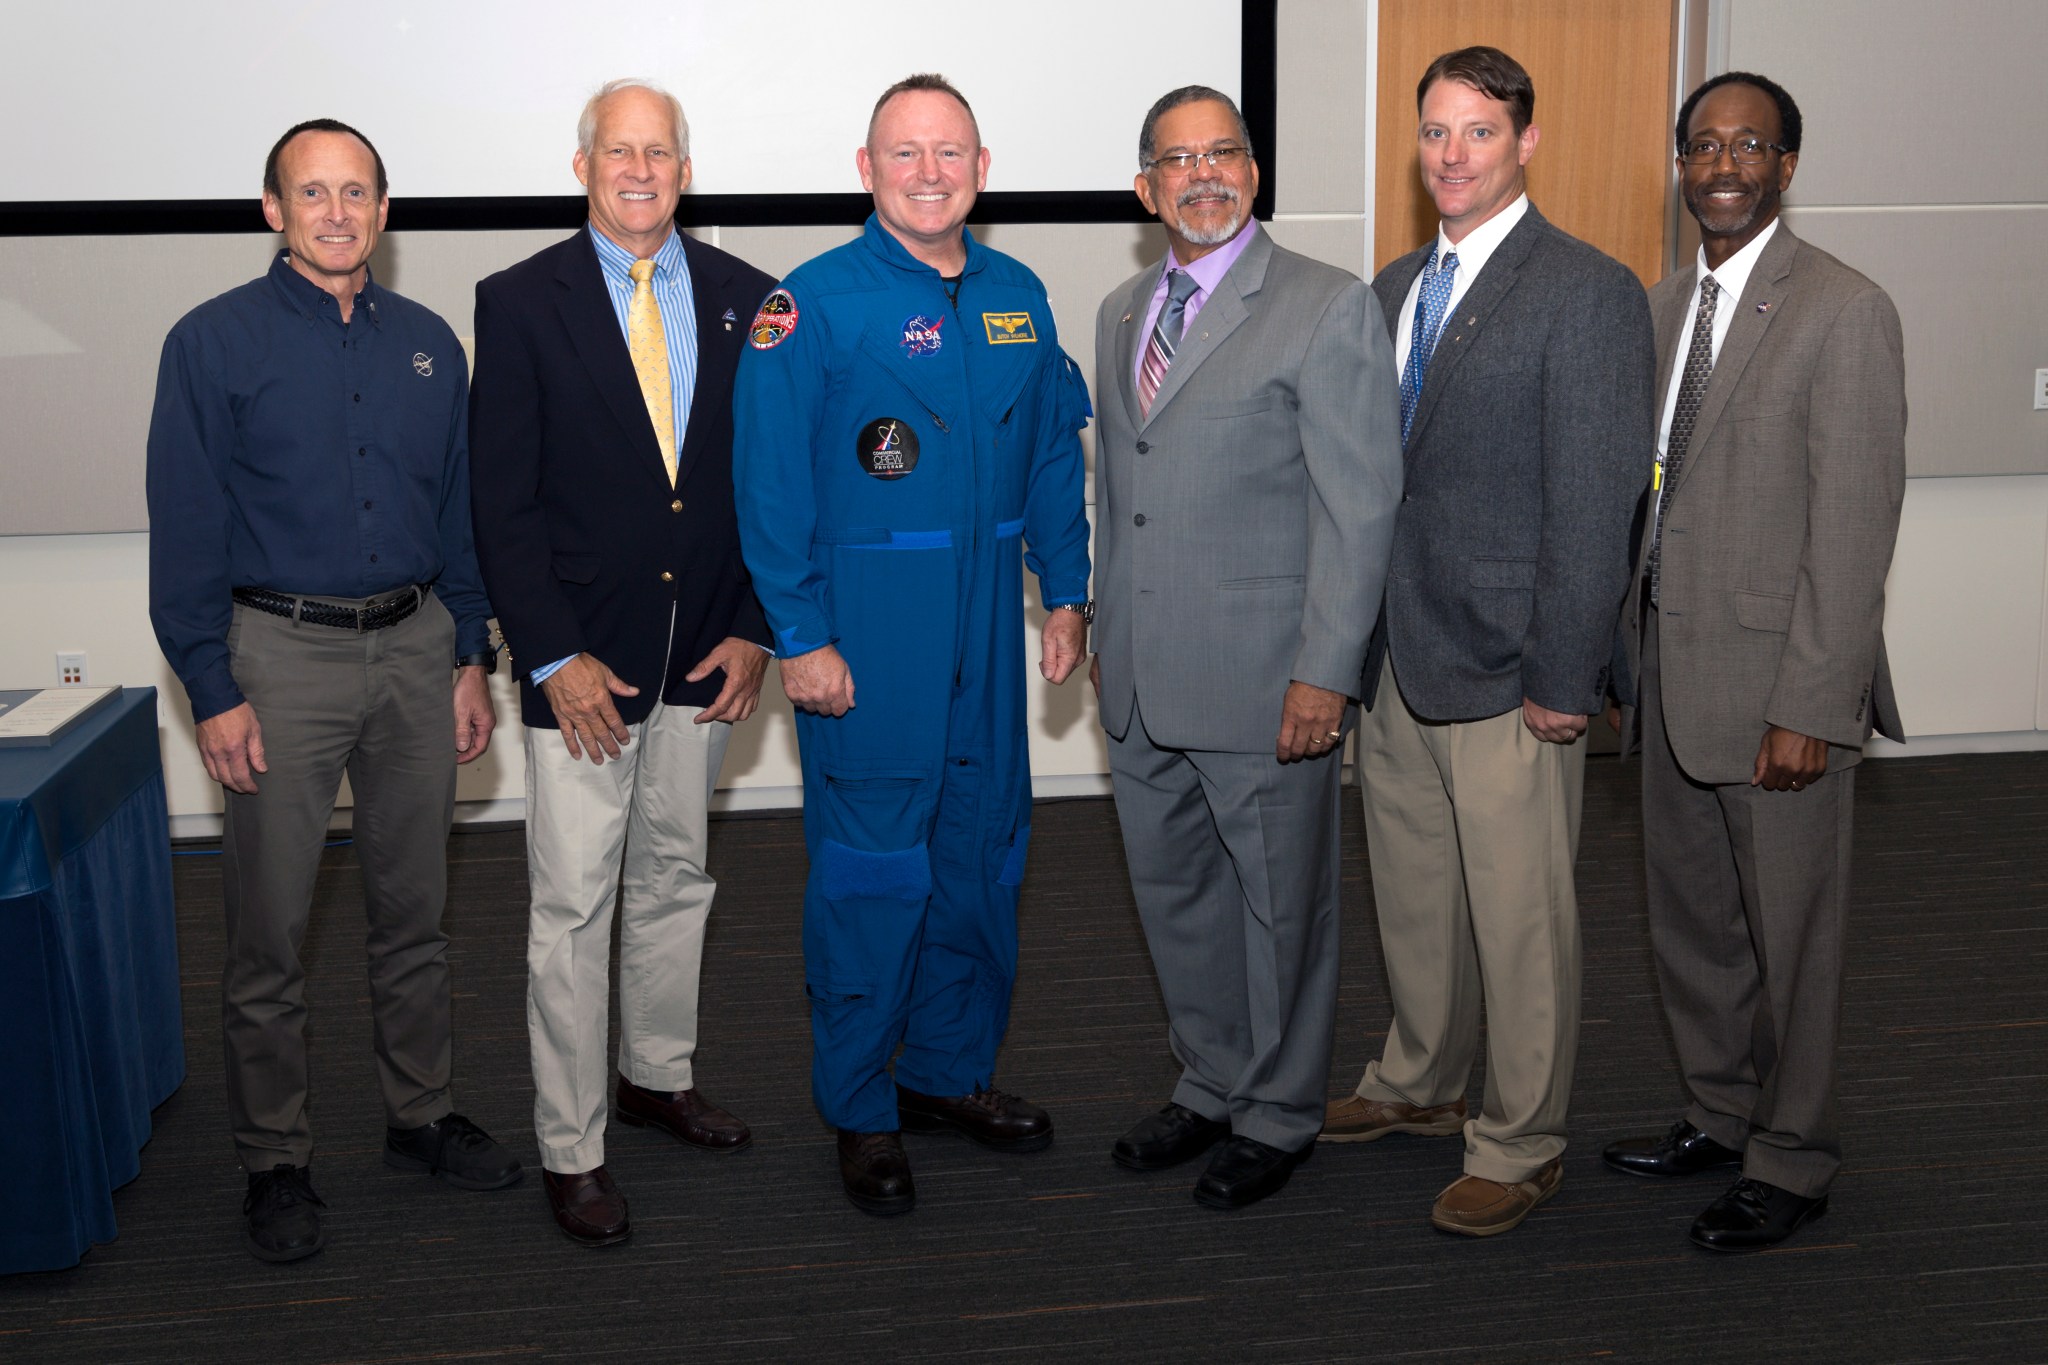 Silver Snoopy awards winners pose with astronaut Barry E. “Butch” Wilmore and Langley Center Director Clayton Turner.